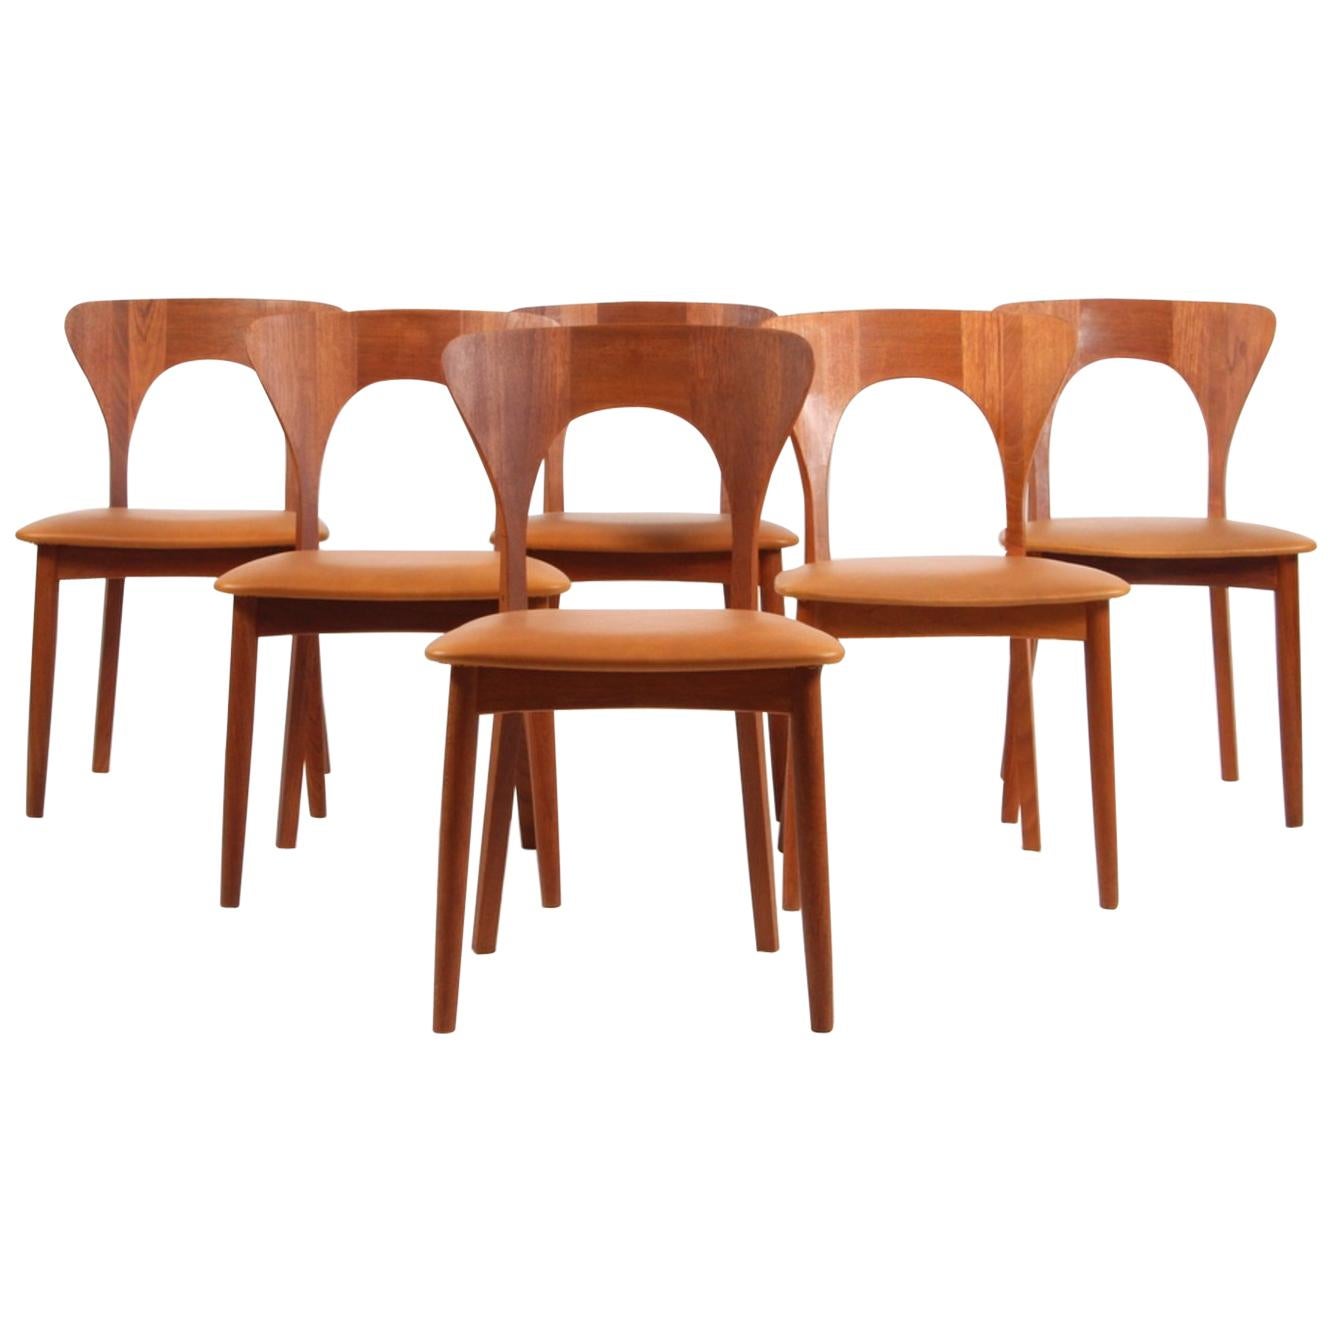 Set of Six Niels Koefoed "Peter" Dining Chairs Teak and Aniline Leather